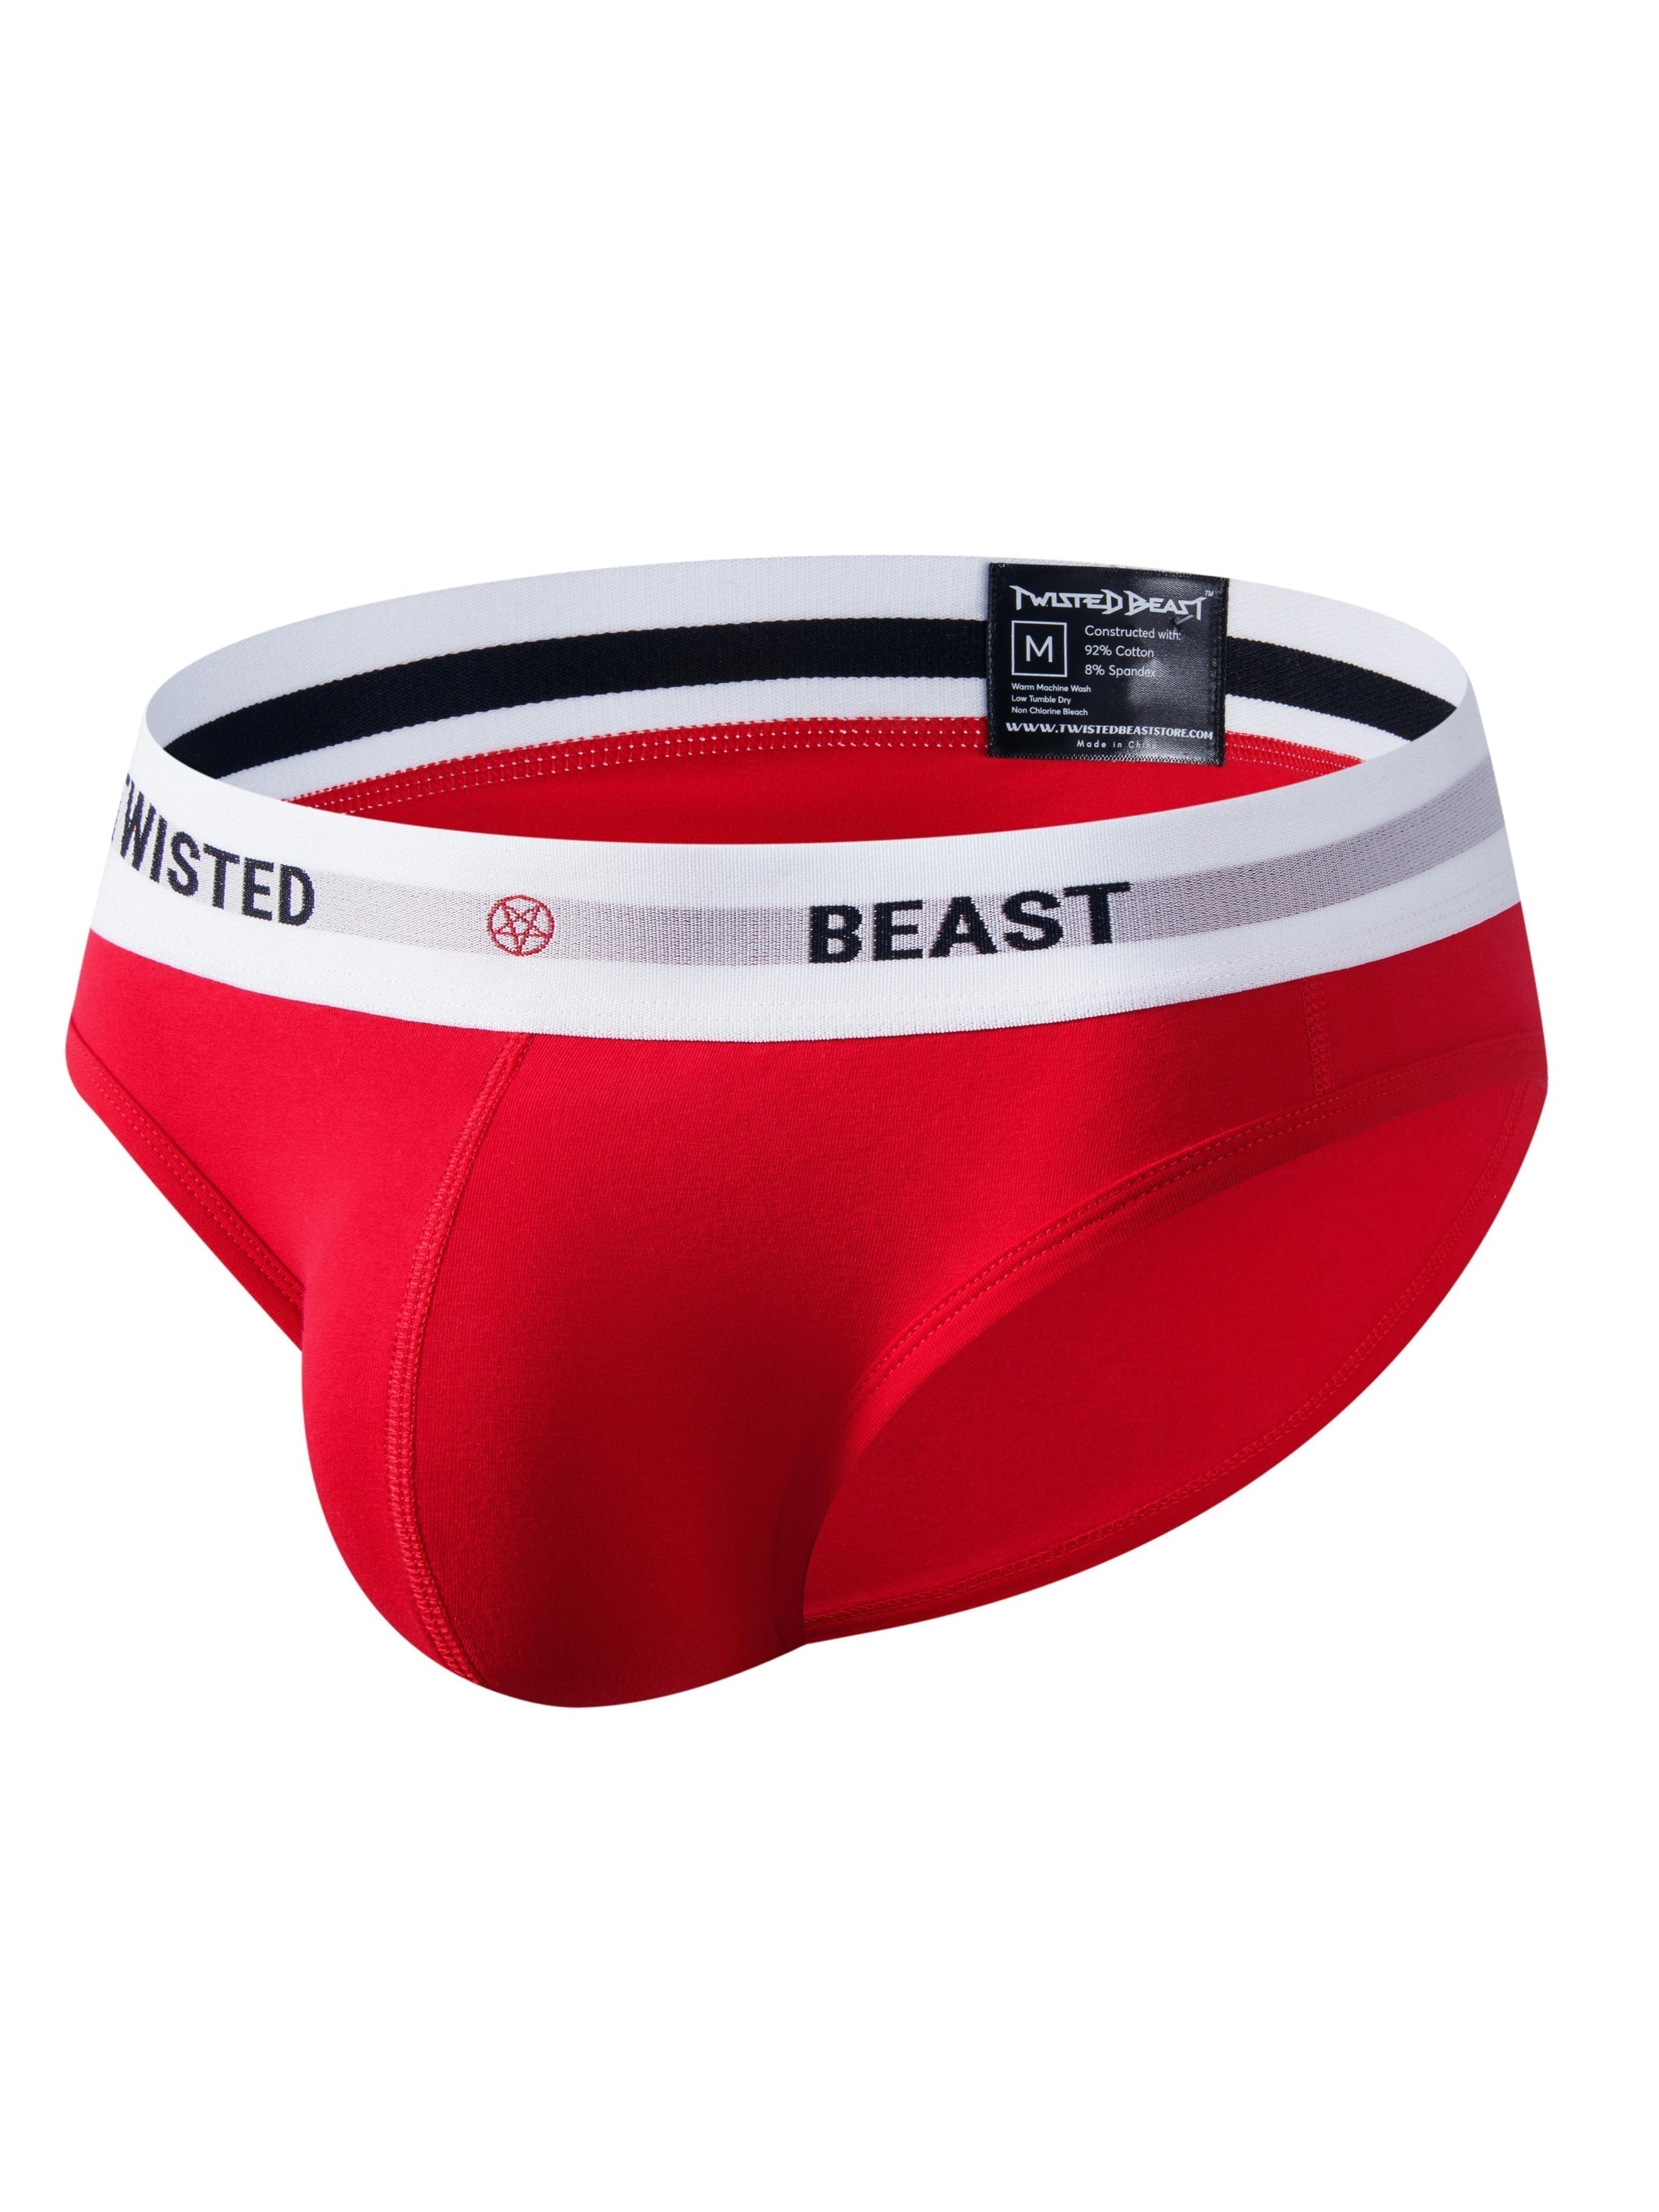 A side photo of a pair of red Insignia Briefs.